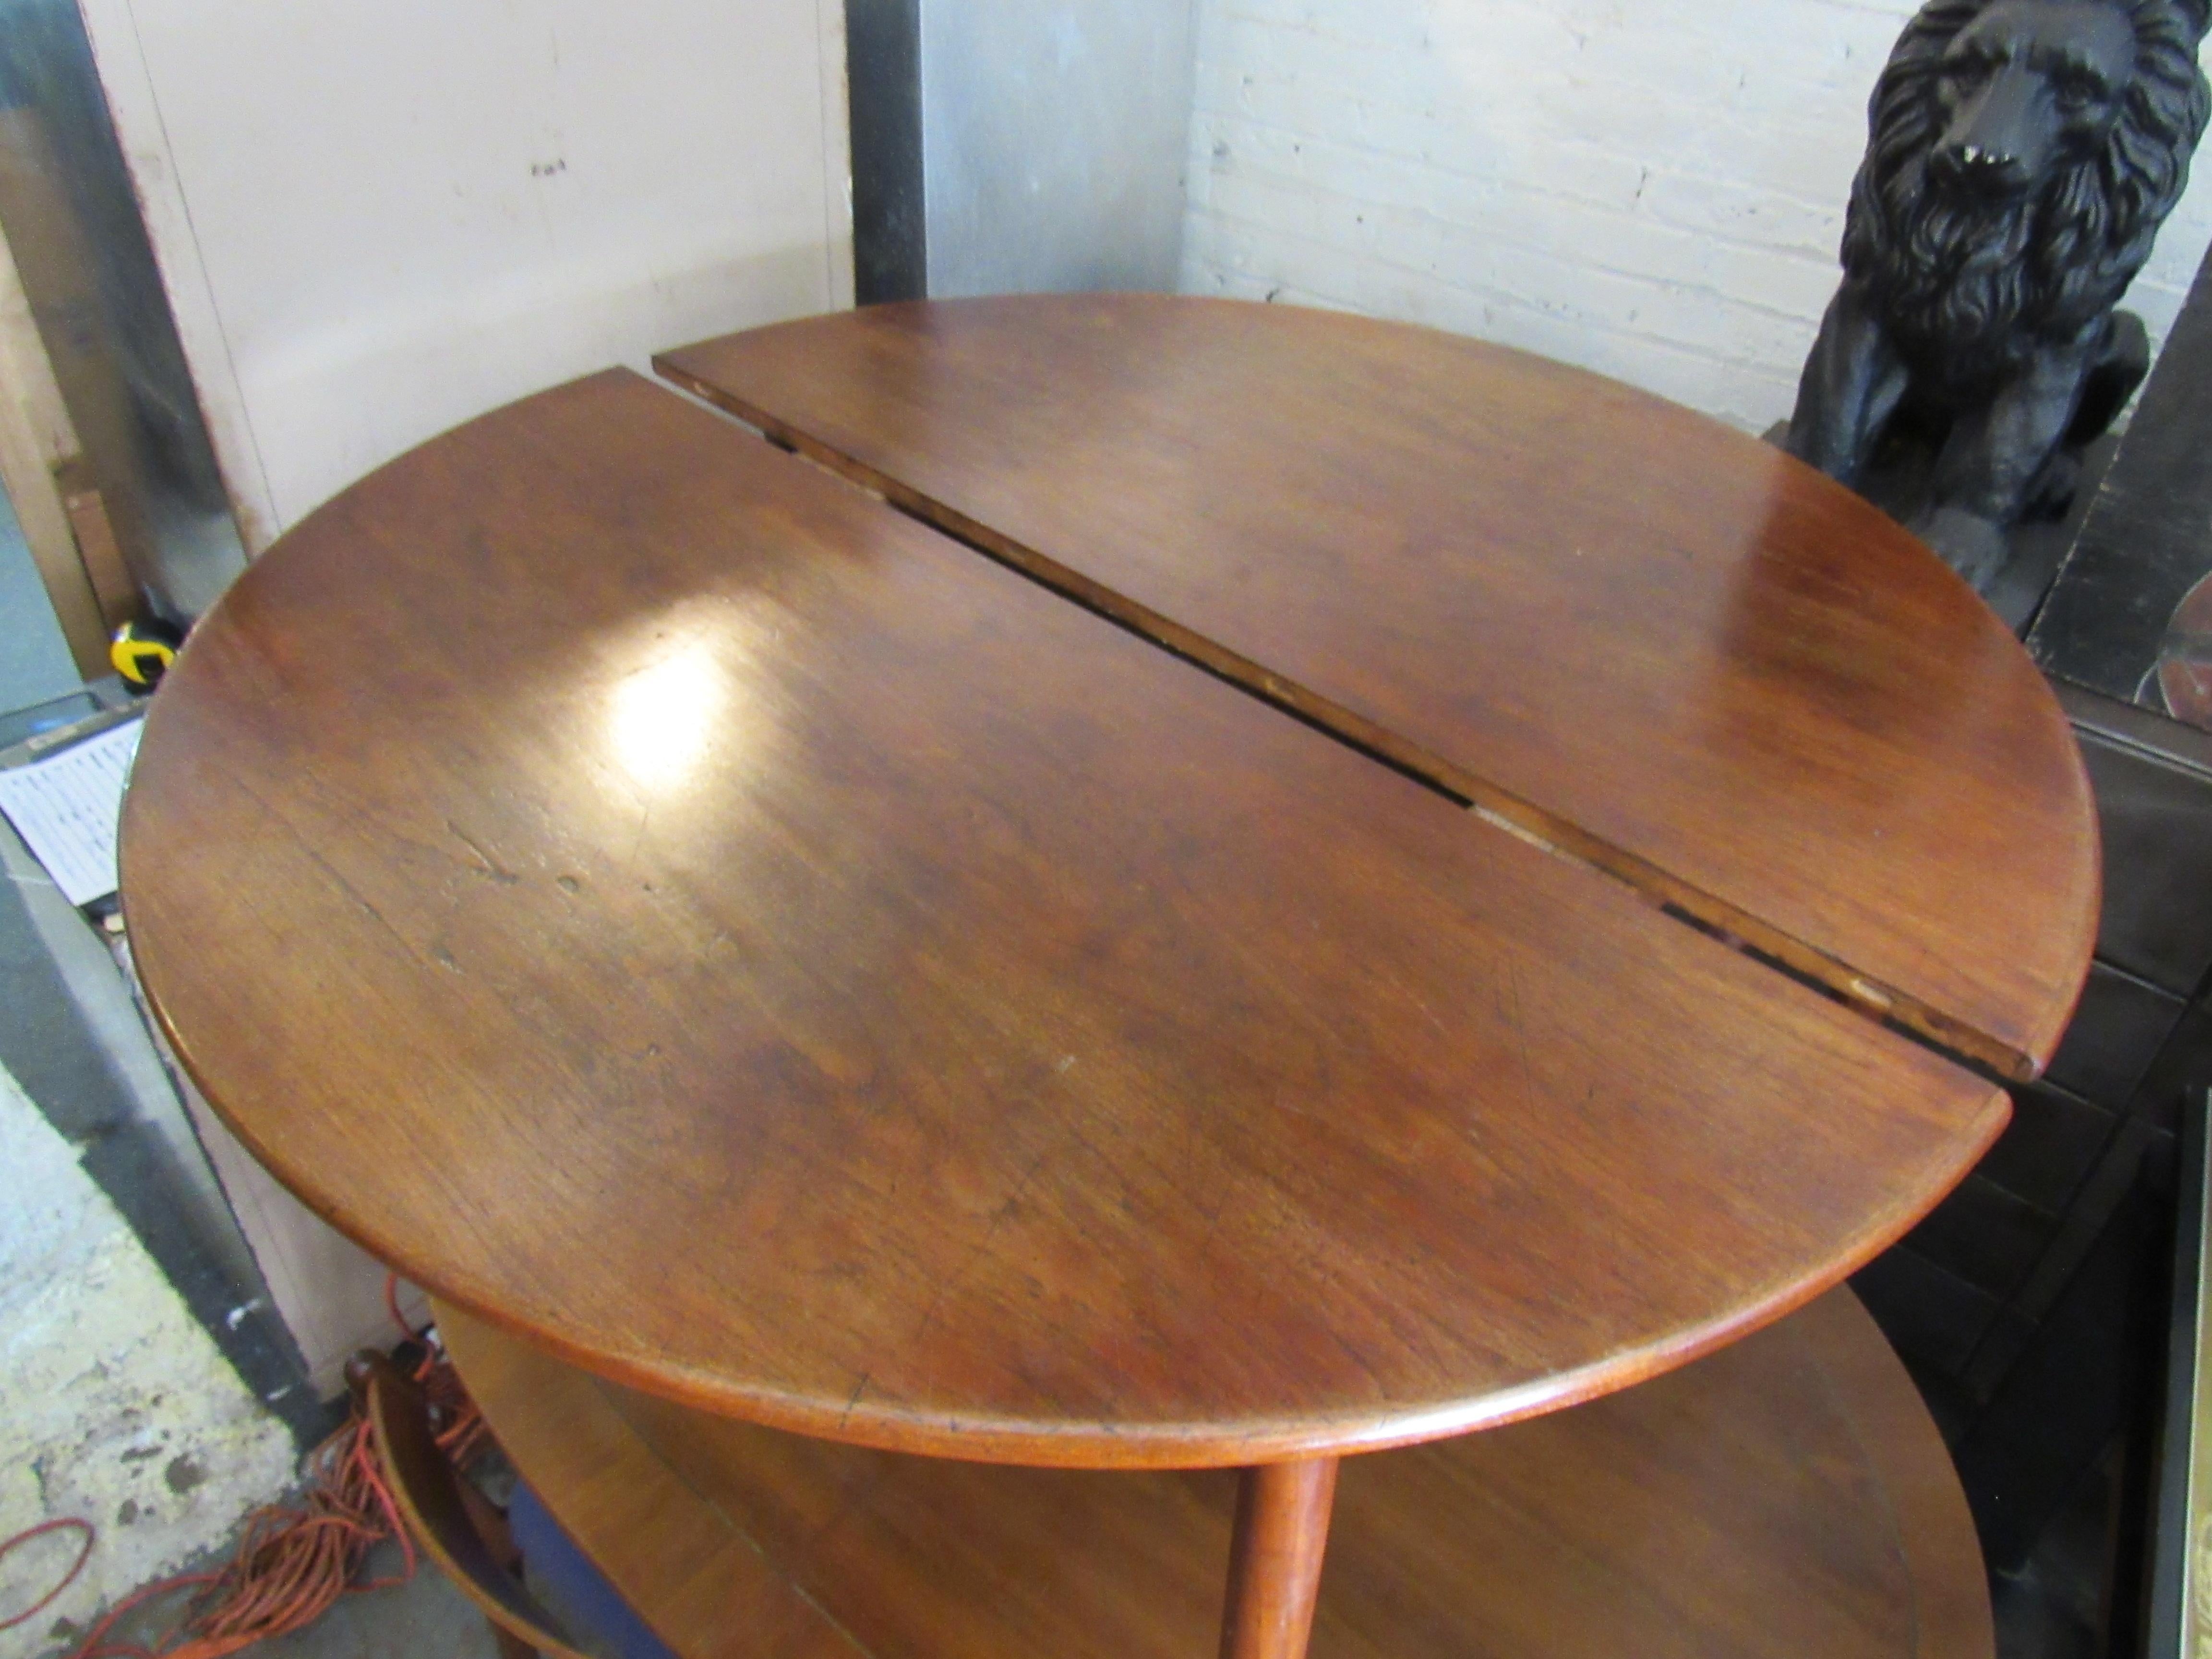 Mid-Century Modern teak dining table with a 20inch wide leaf. Classic Danish design.
(Please confirm item location - NY or NJ - with dealer).
   